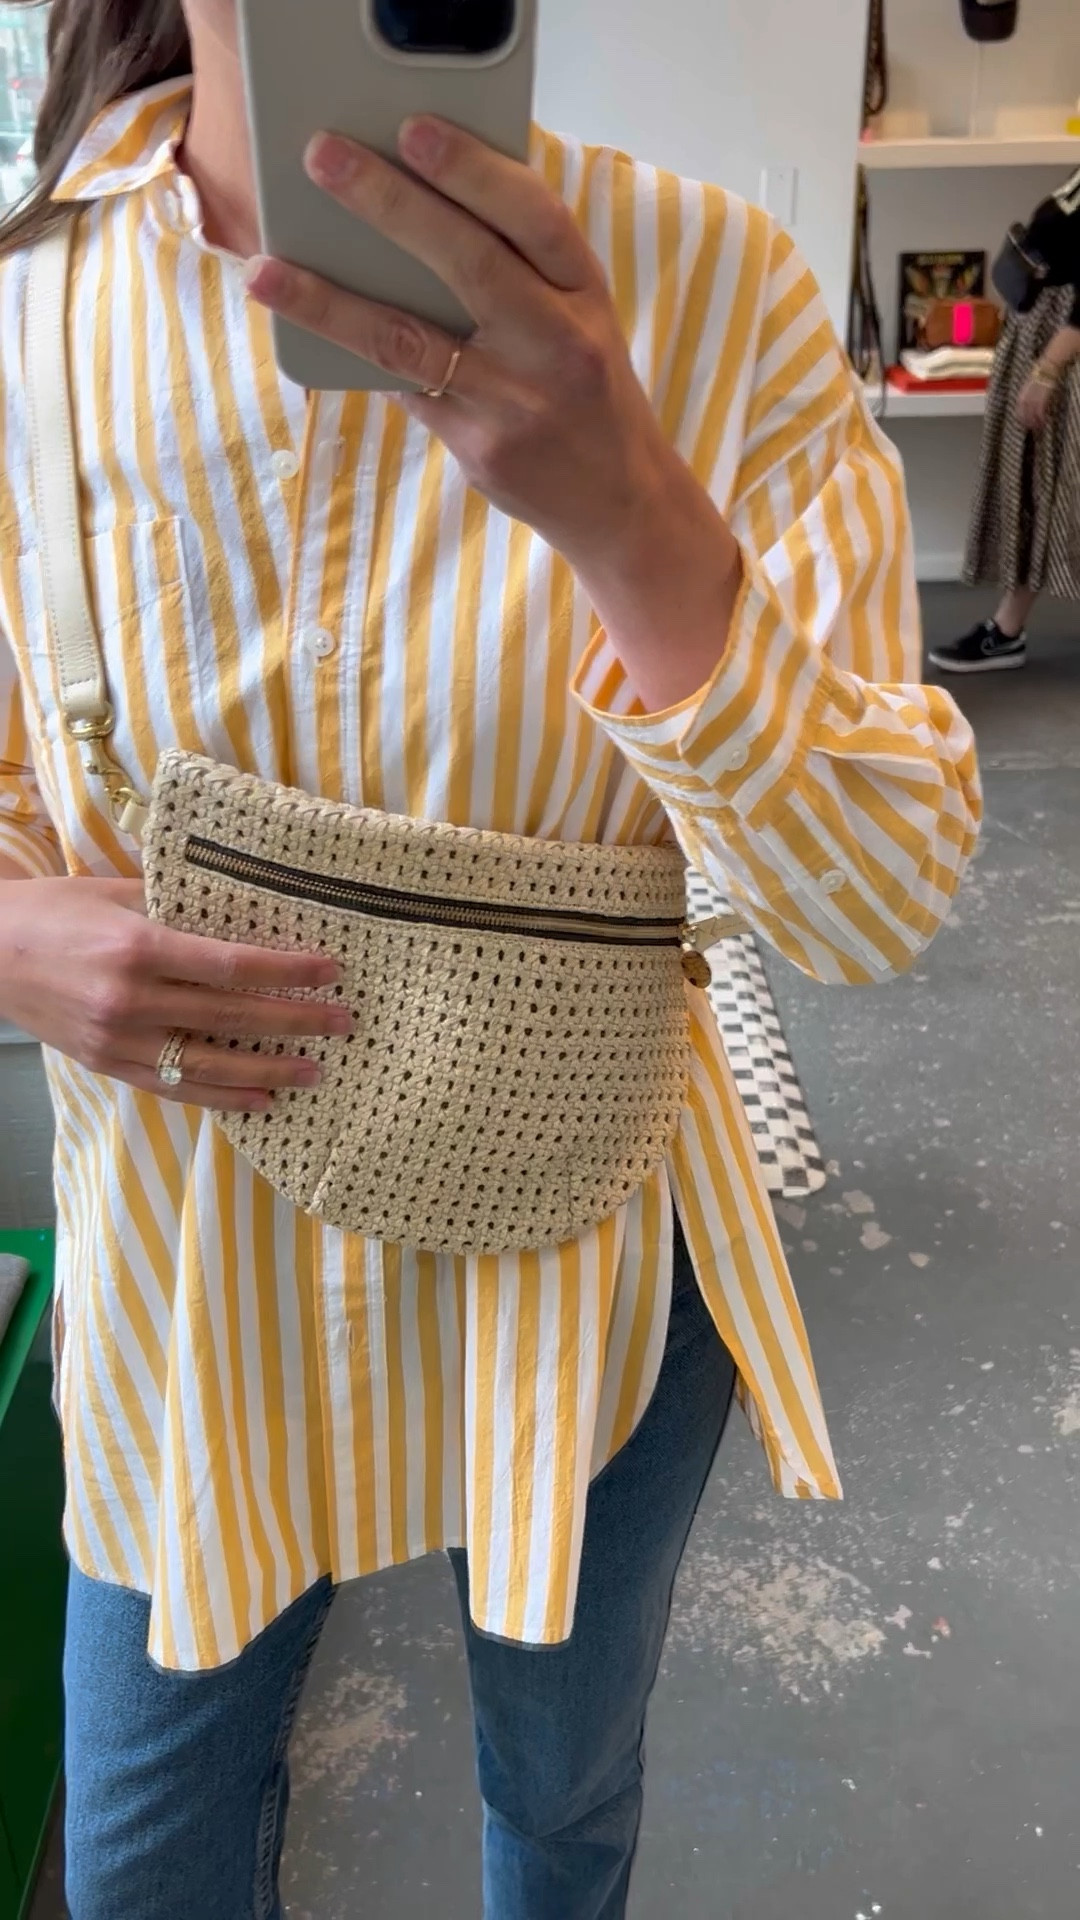 Clare V. Grande Fanny Woven Satchel curated on LTK